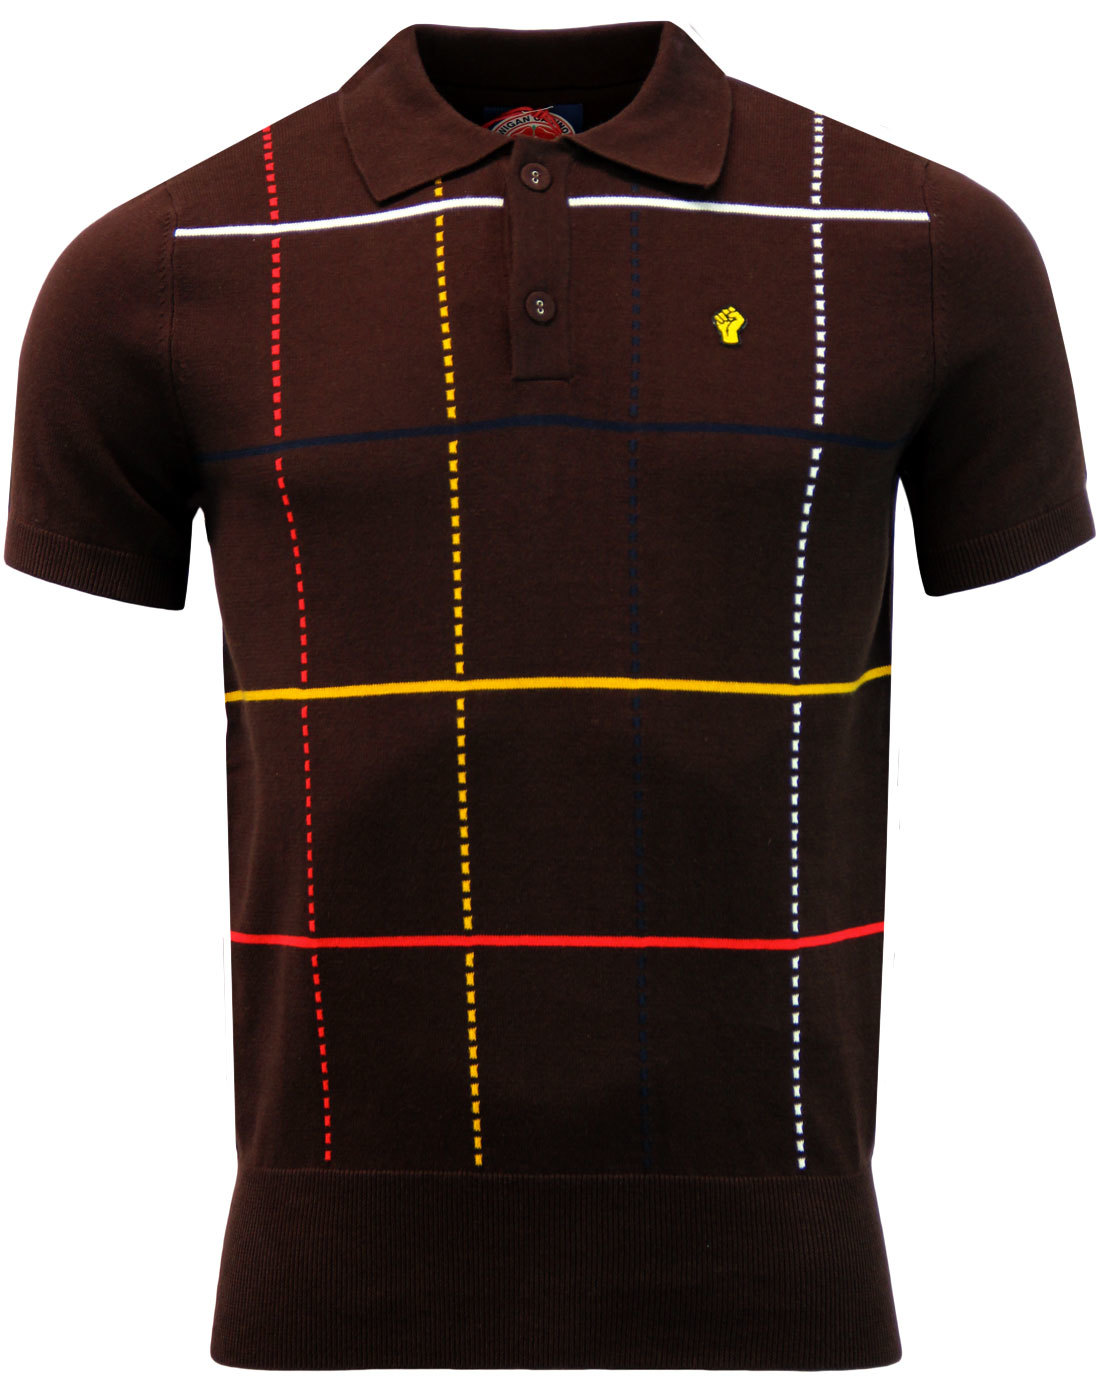 WIGAN CASINO Northern Soul Check Knit Polo Top (C)